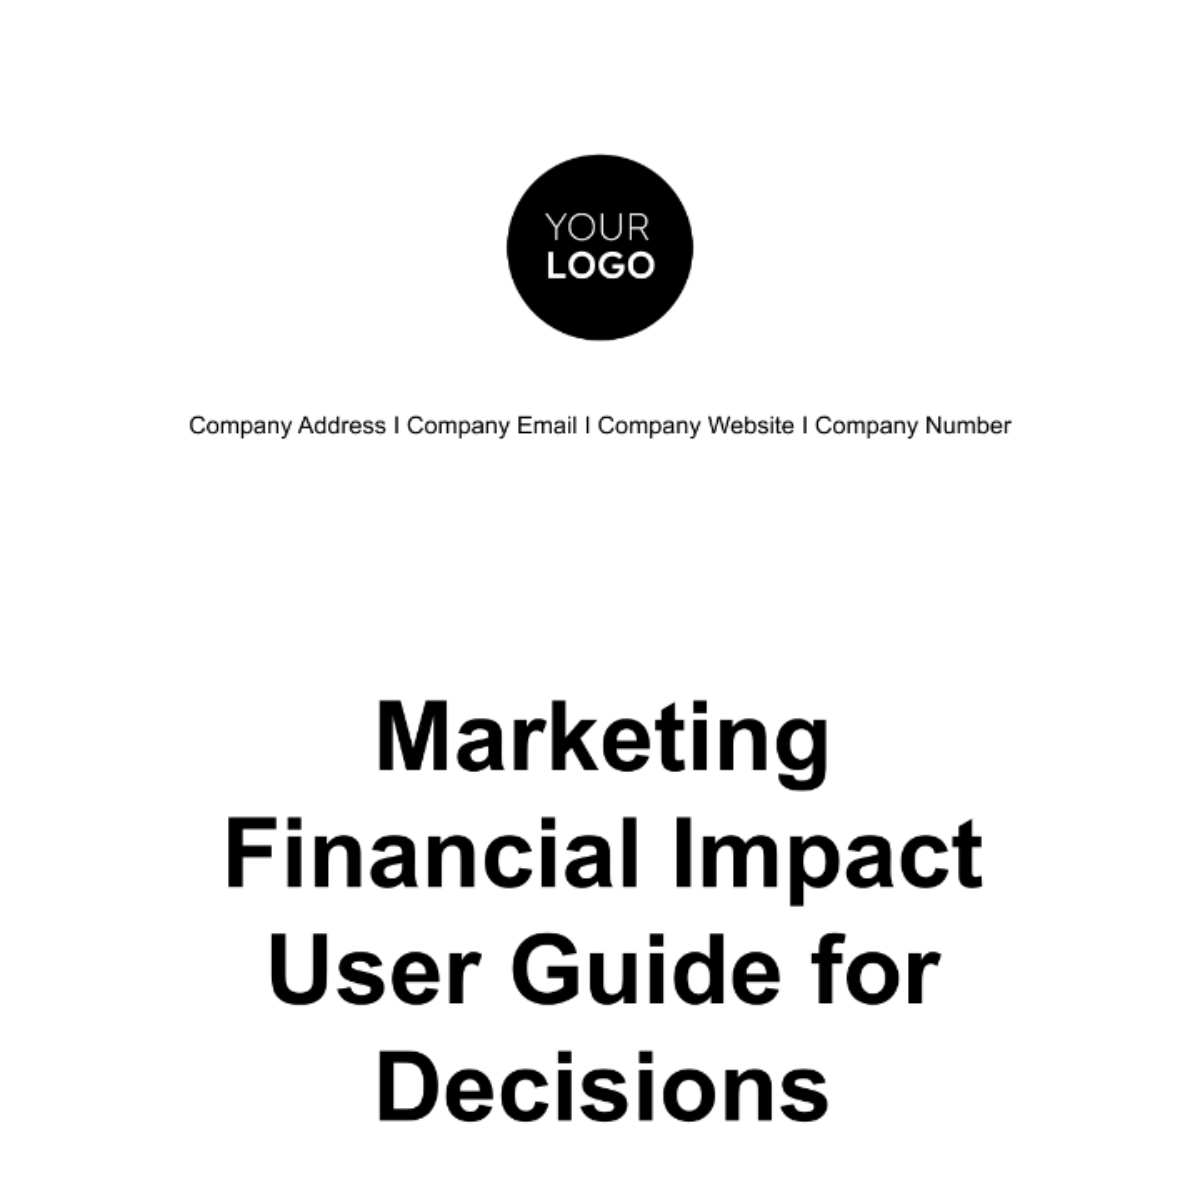 Free Marketing Financial Impact User Guide for Decisions Template